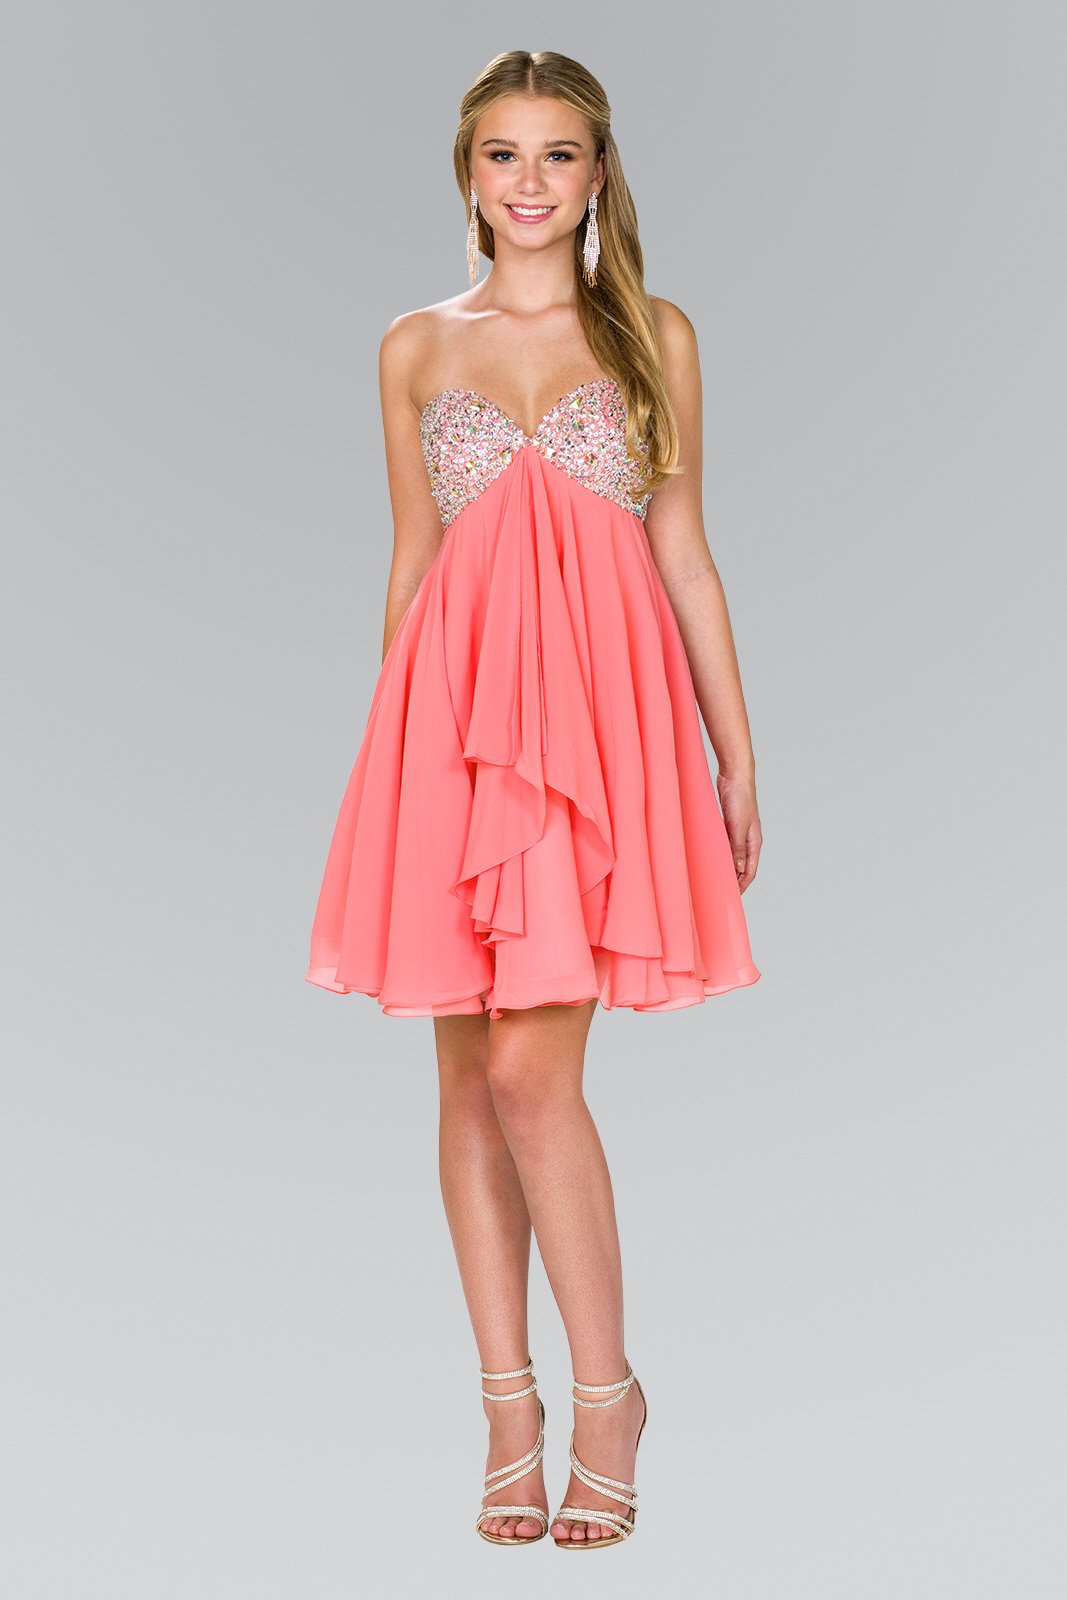 gs1142-coral-1-short-homecoming-cocktail-date-night-chiffon-jewel-open-back-zipper-strapless-sweetheart-a-line.jpg